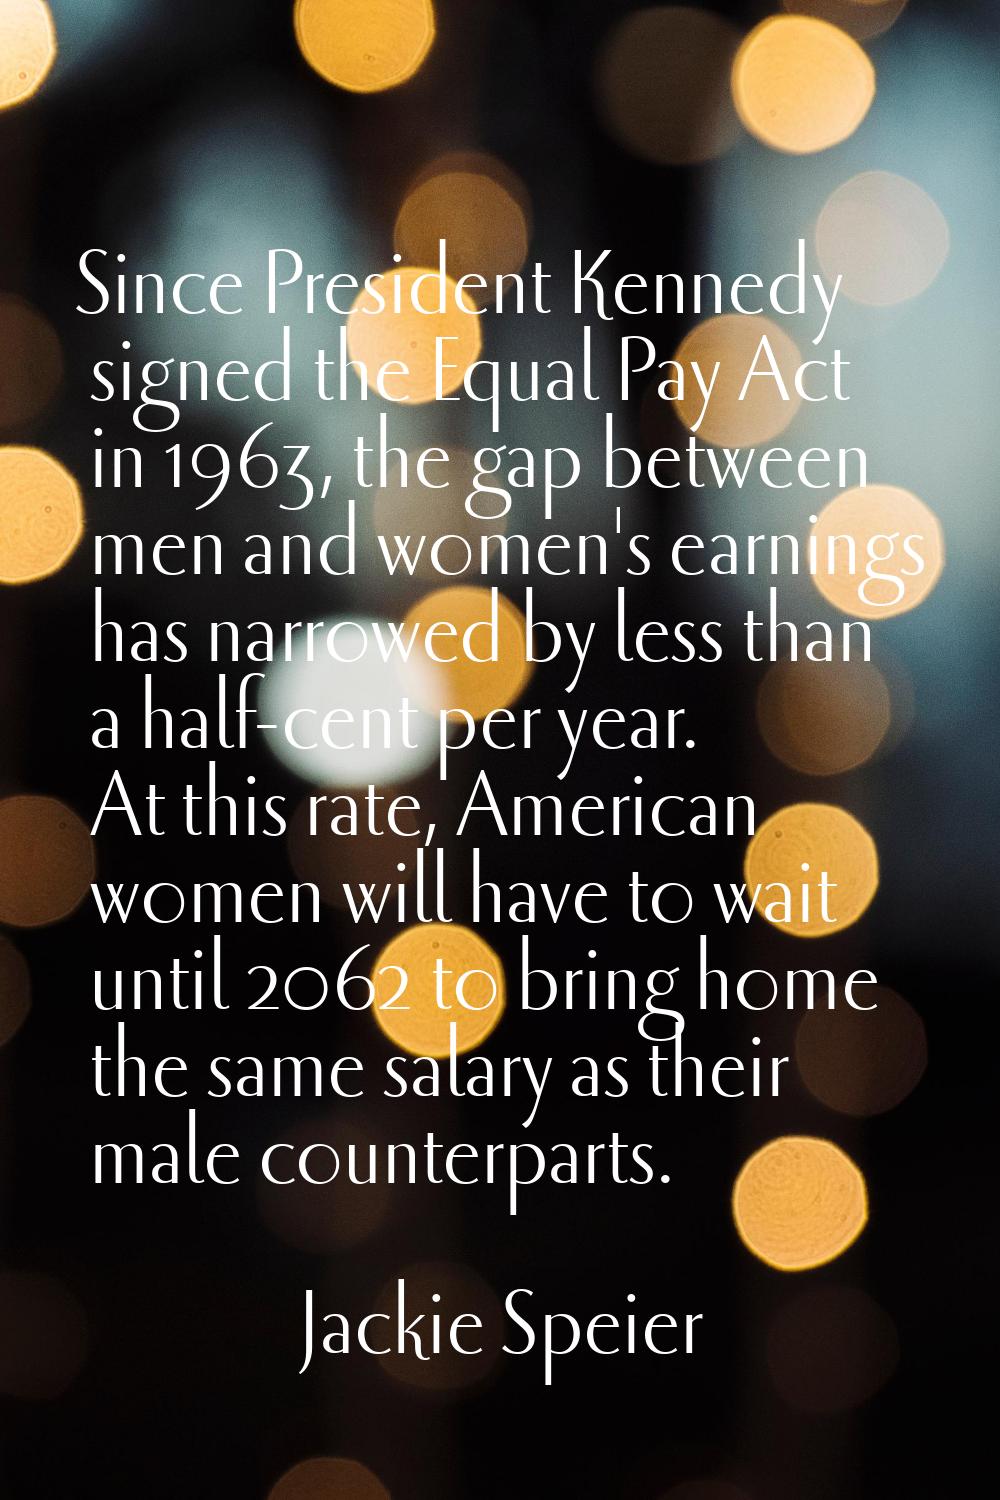 Since President Kennedy signed the Equal Pay Act in 1963, the gap between men and women's earnings 